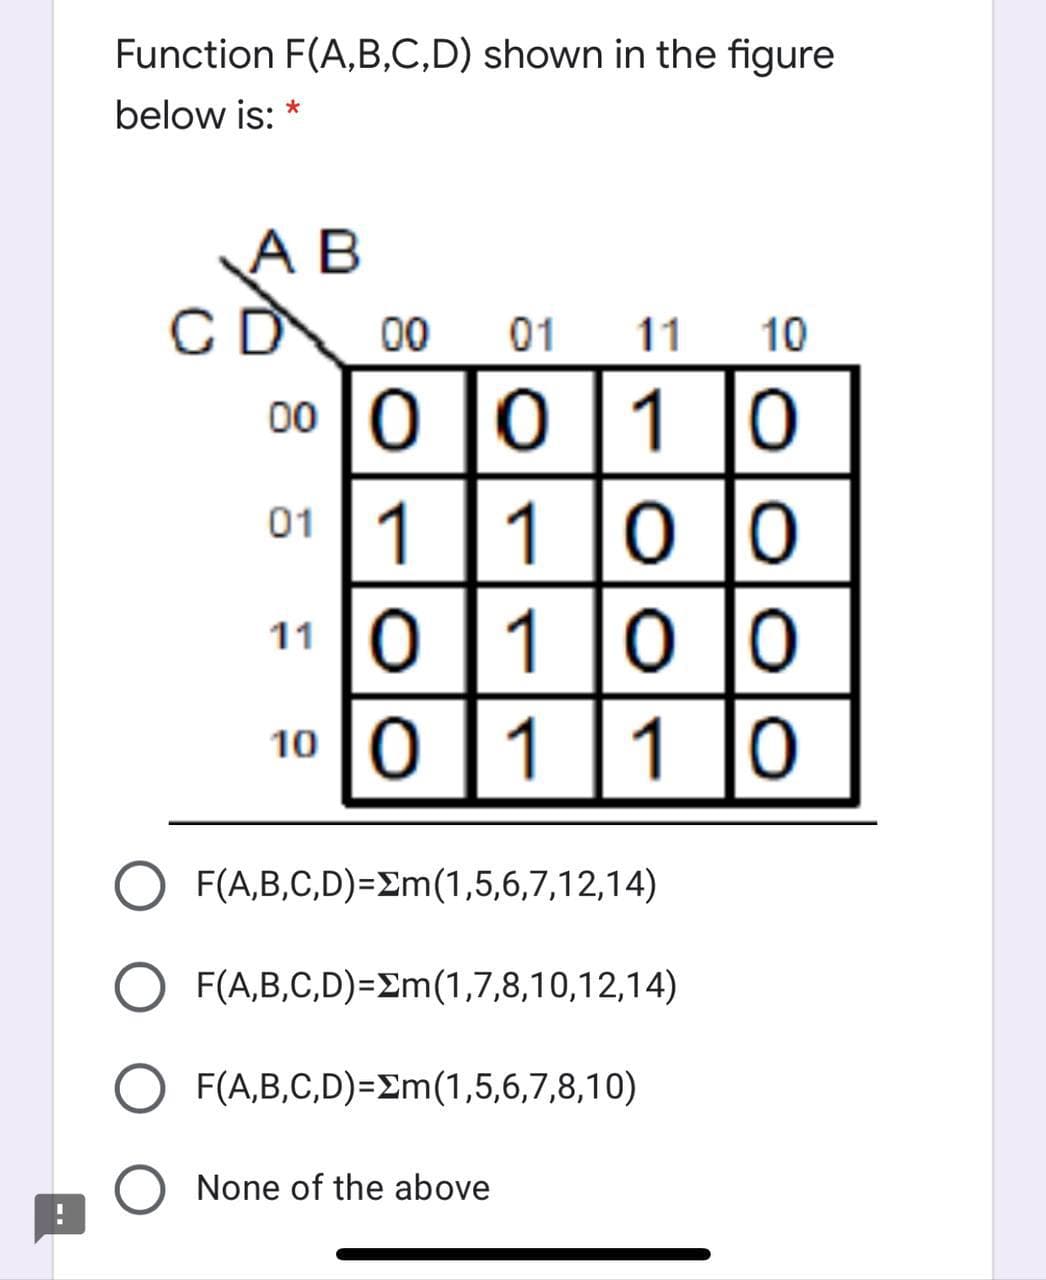 Function F(A,B,C,D) shown in the figure
below is: *
A B
CD
00
01
11
10
00 |0 |0 [1 |o
01 1|1
110
100
1 |0
O F(A,B,C,D)=£m(1,5,6,7,12,14)
F(A,B,C,D)=Em(1,7,8,10,12,14)
F(A,B,C,D)=Em(1,5,6,7,8,10)
None of the above
